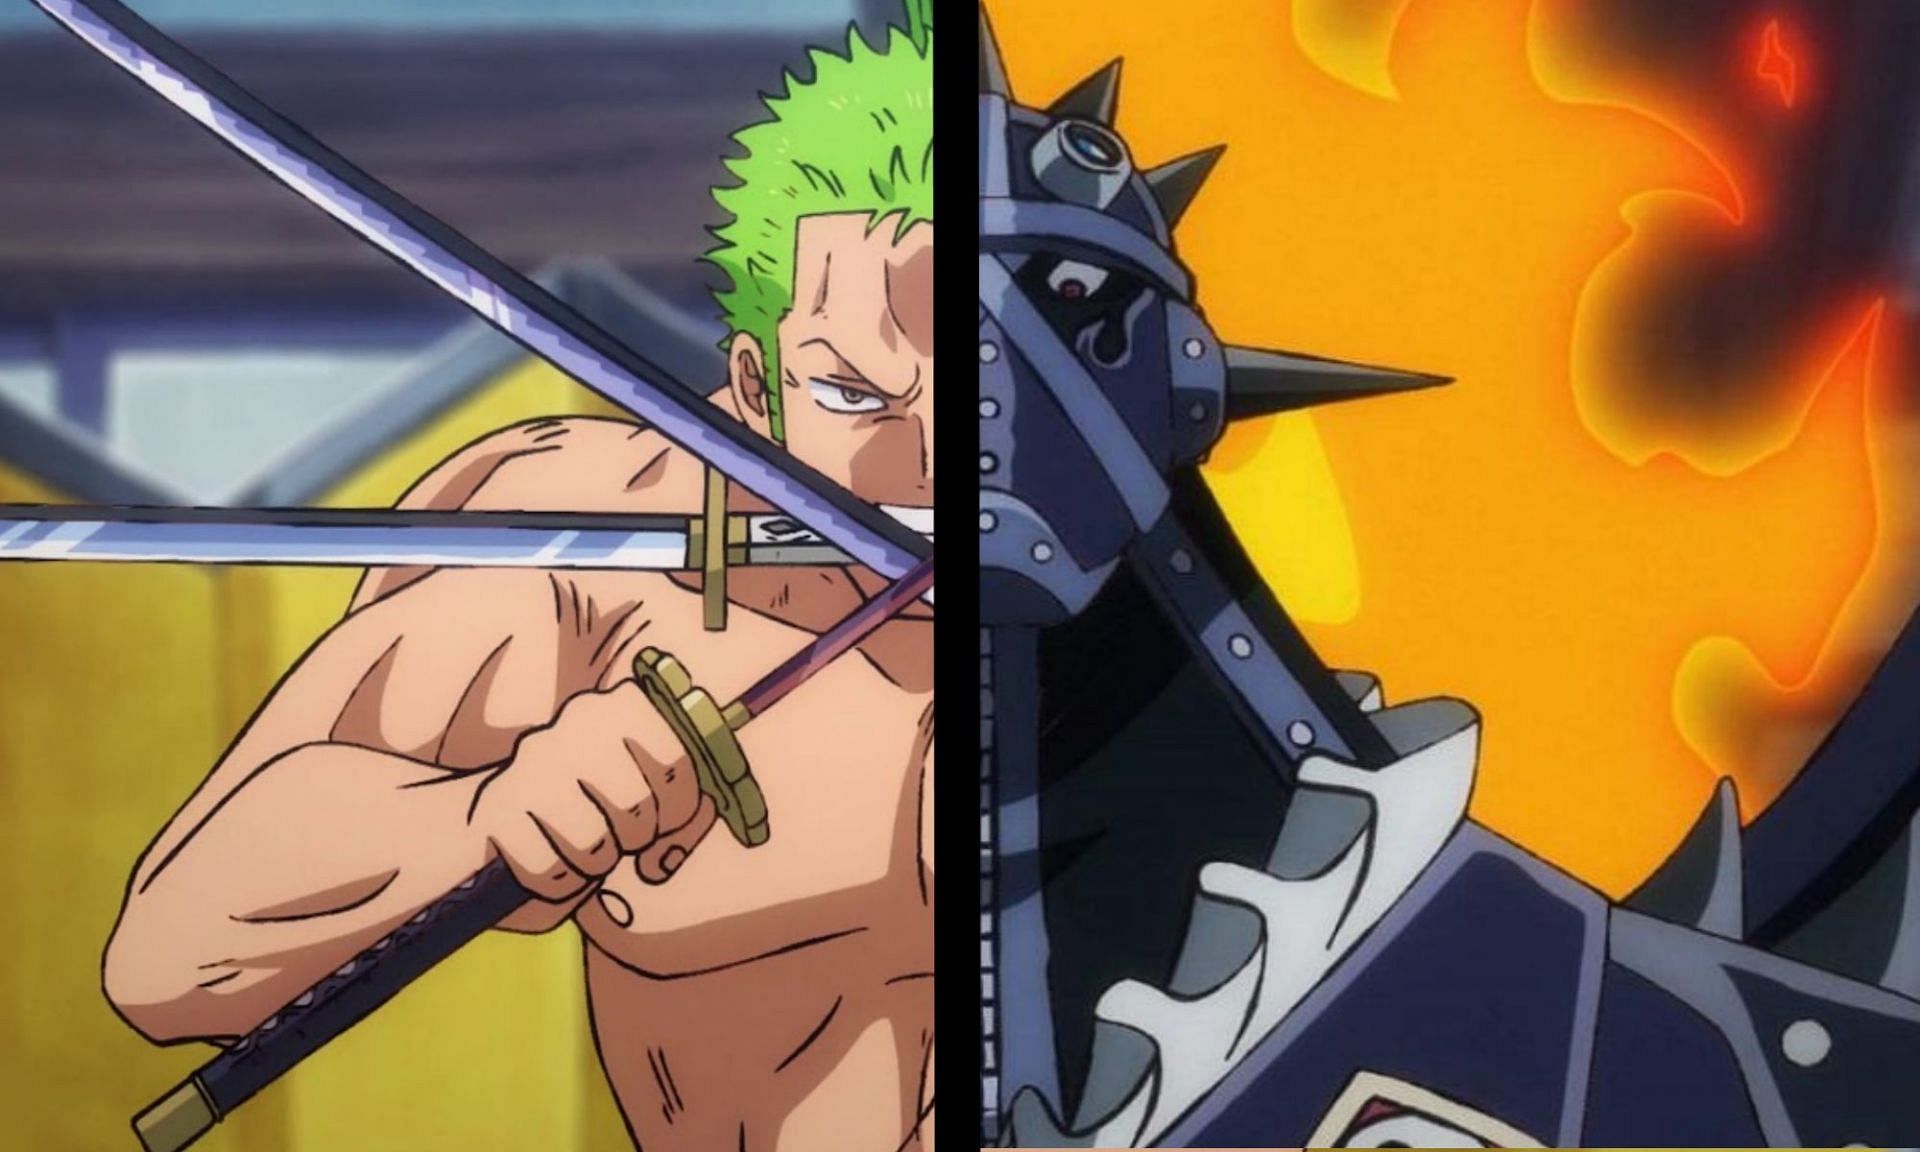 Read One Piece 1033: Zoro's Past and Strenght!